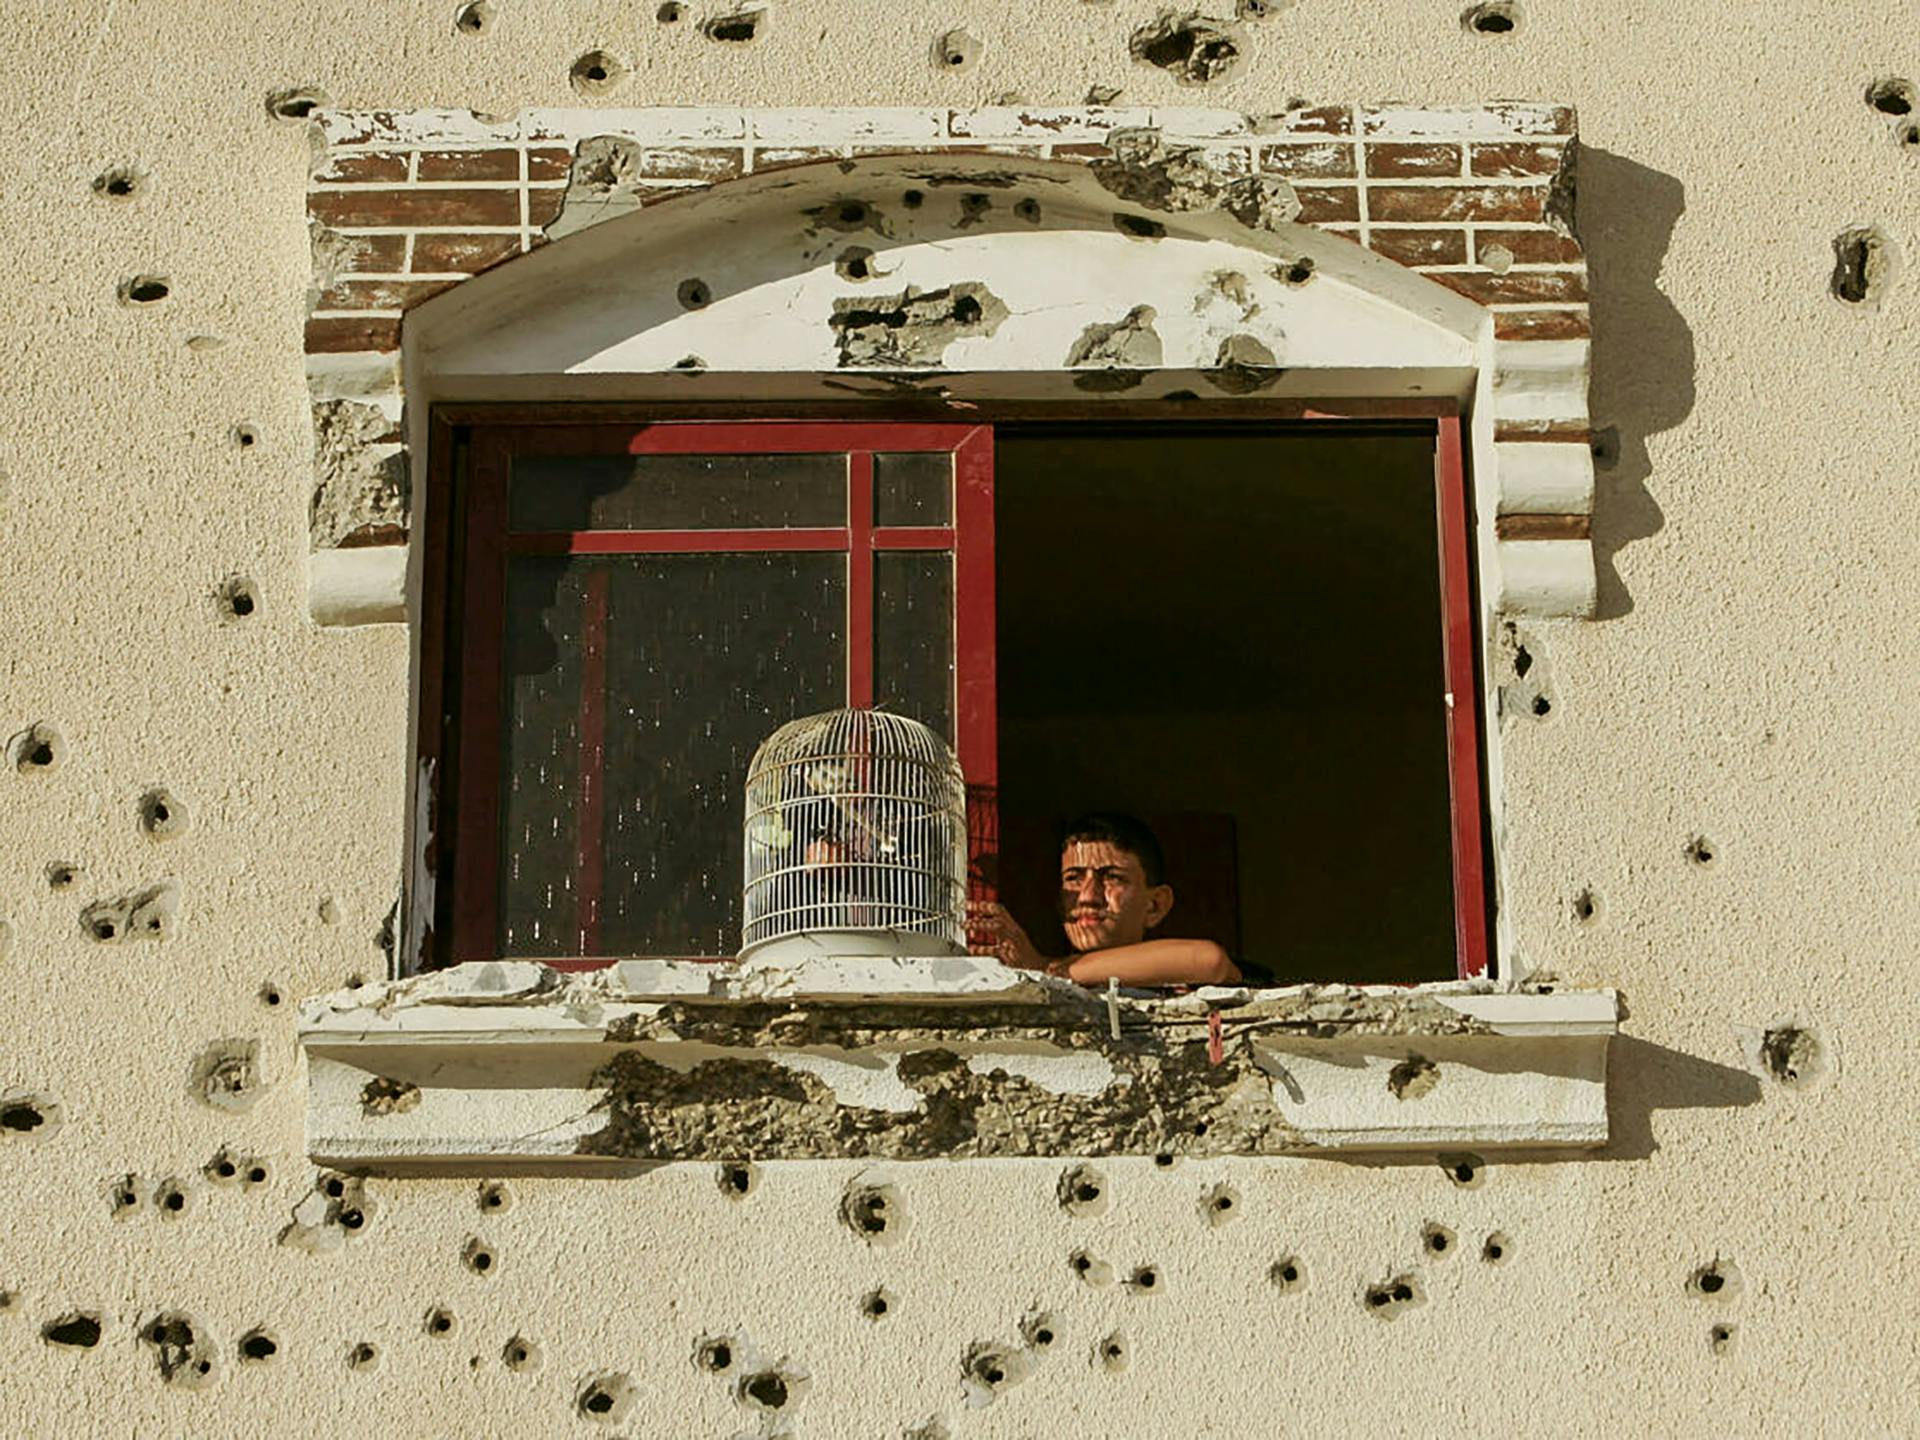 A boy looking out of a window of a building with gun shots on the facade.